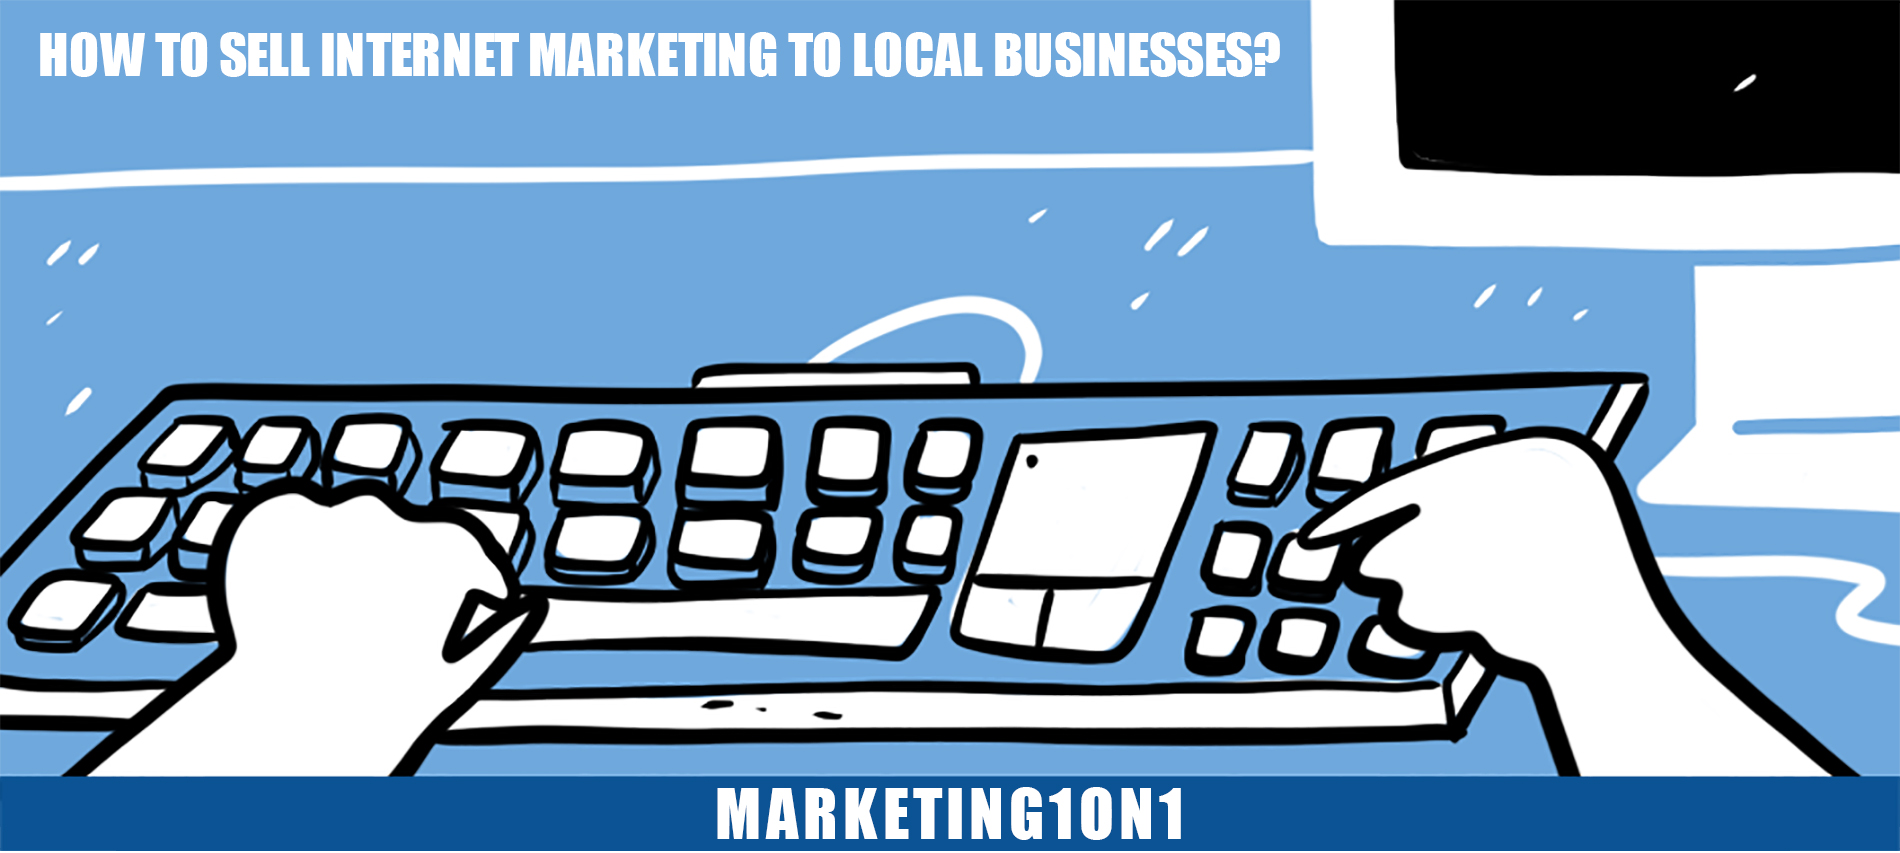 How to sell internet marketing to local businesses?